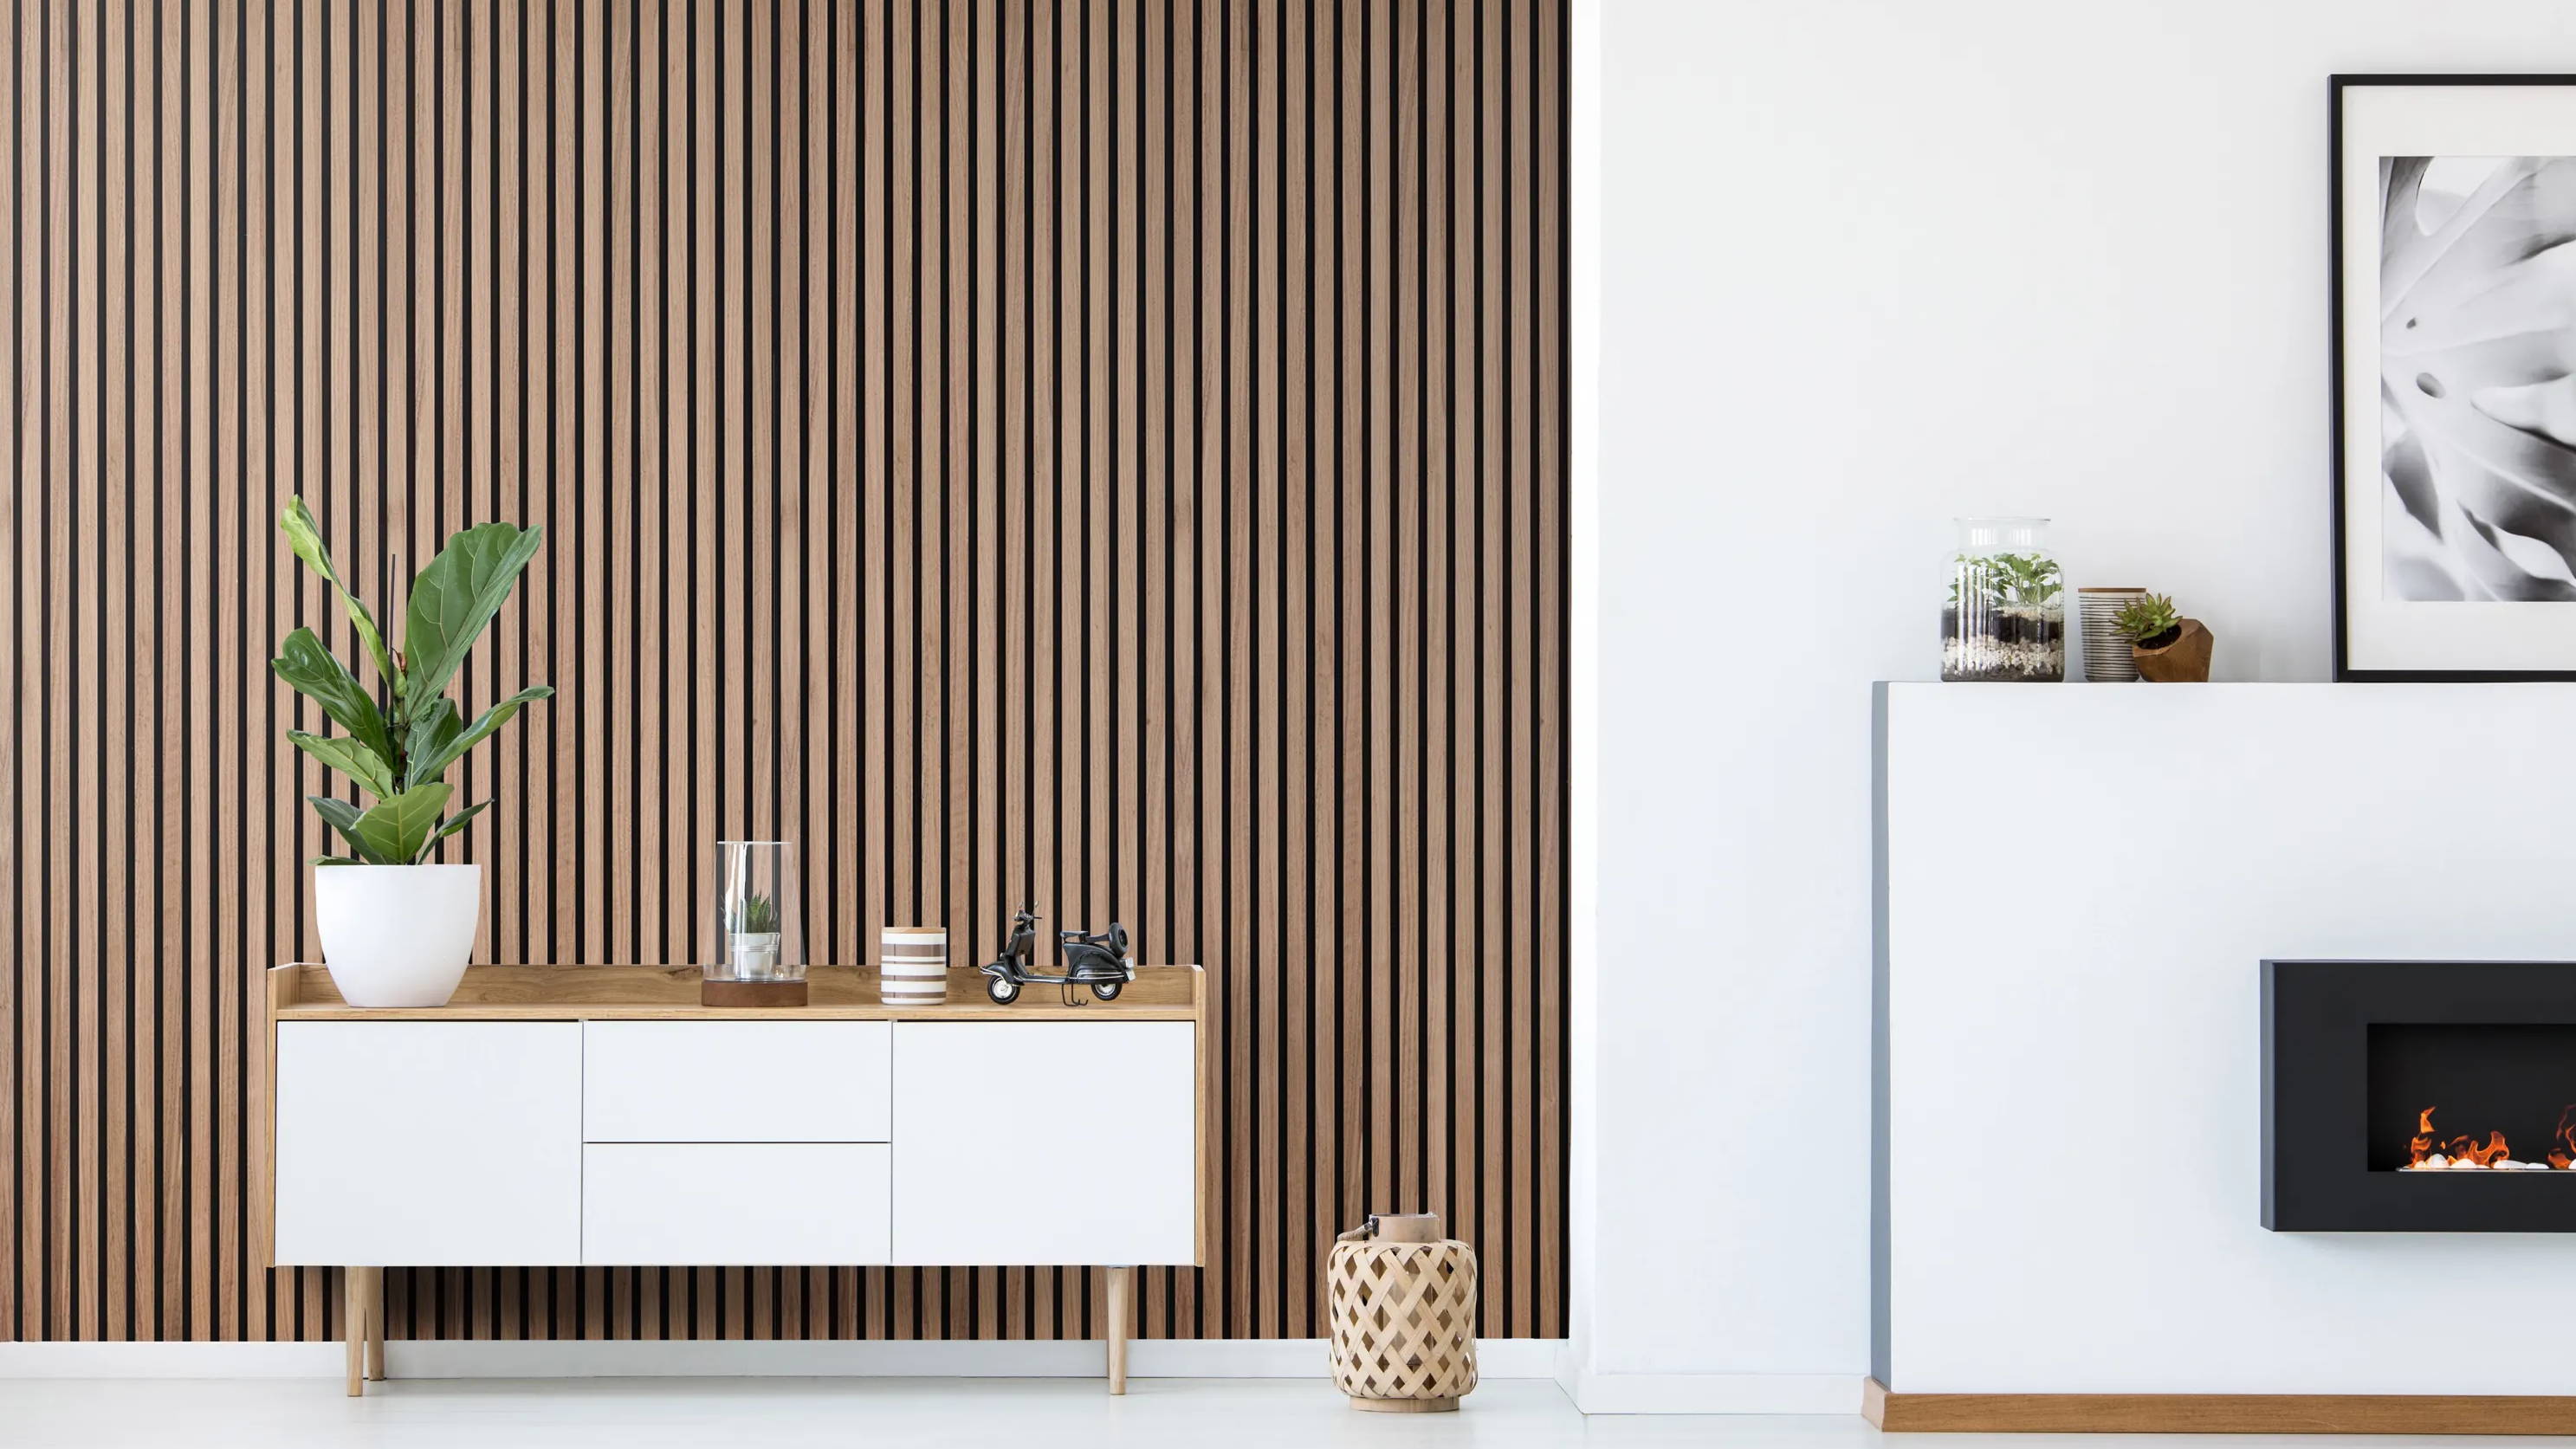 Walnut acoustic slat wood panels used in a modern living environment.